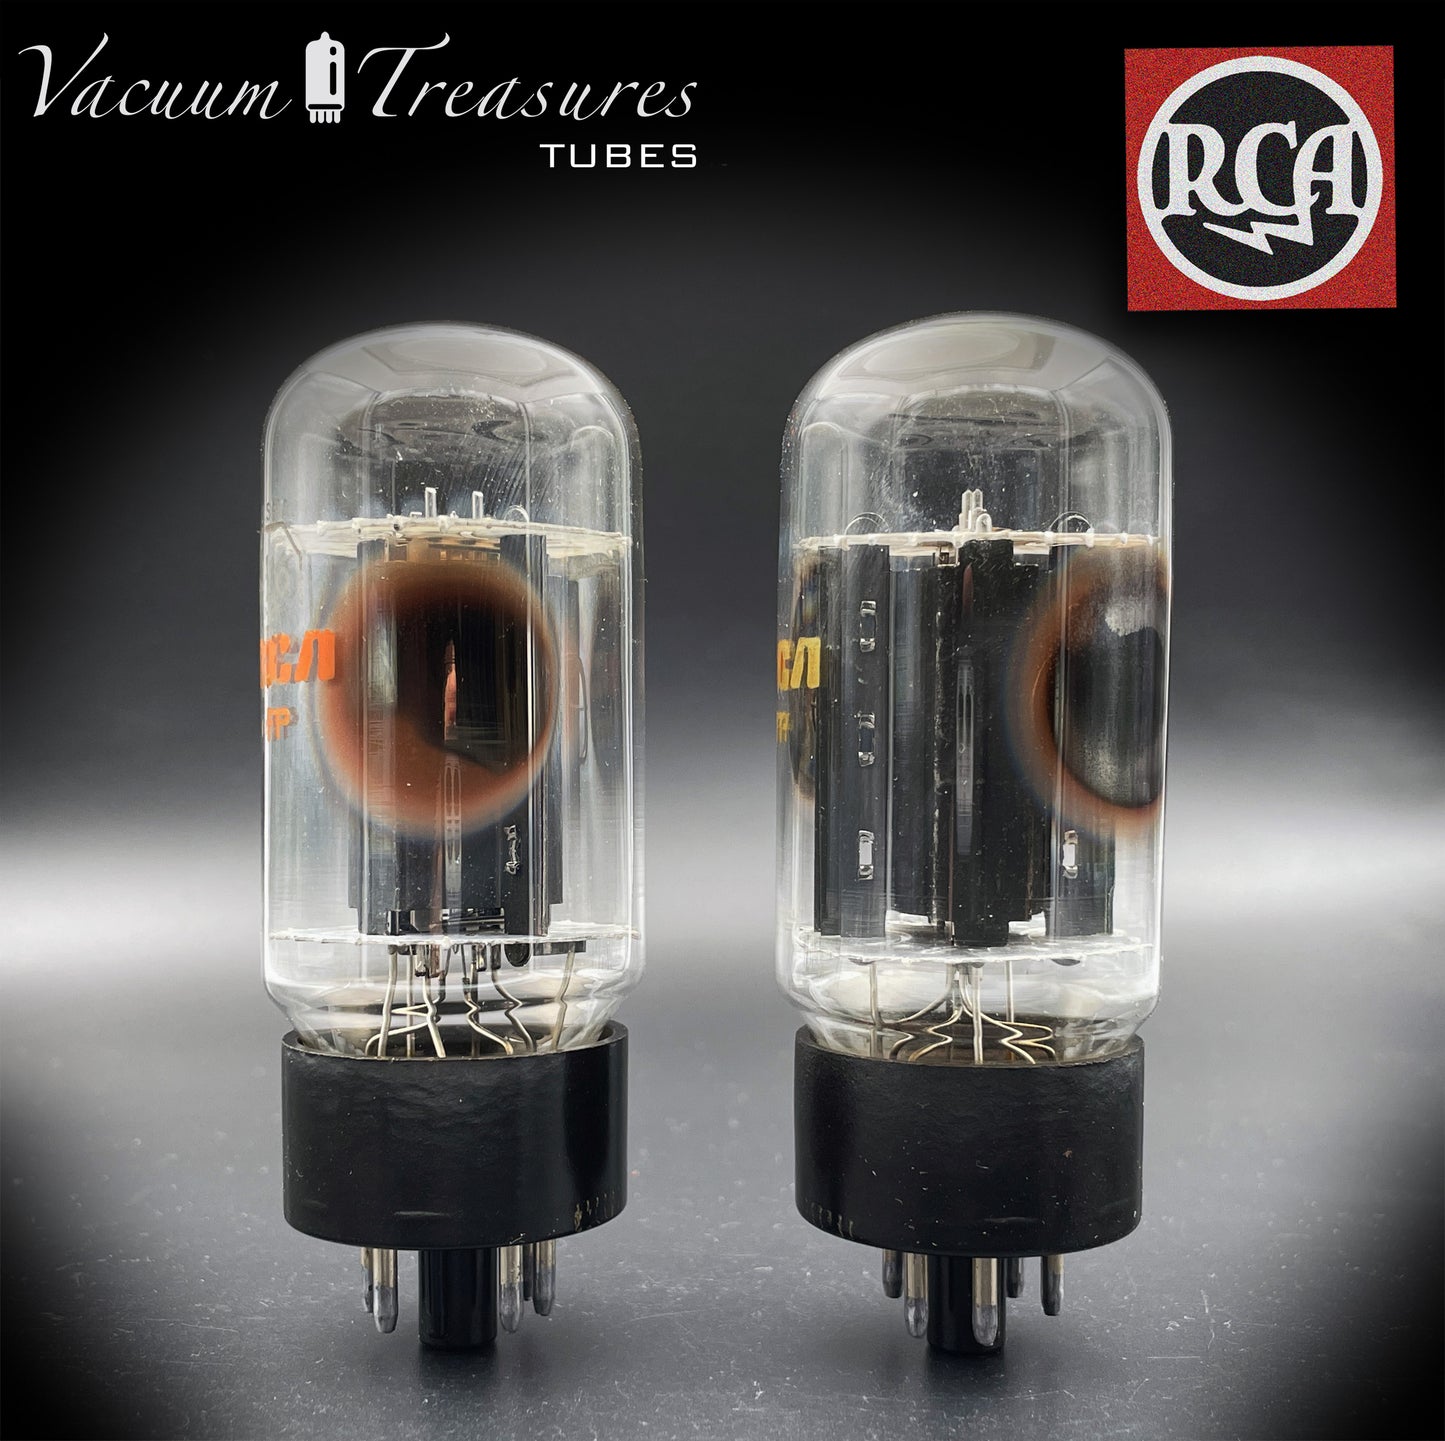 6L6GC RCA Black Plates Side OO Getter Matched Tubes Made in USA